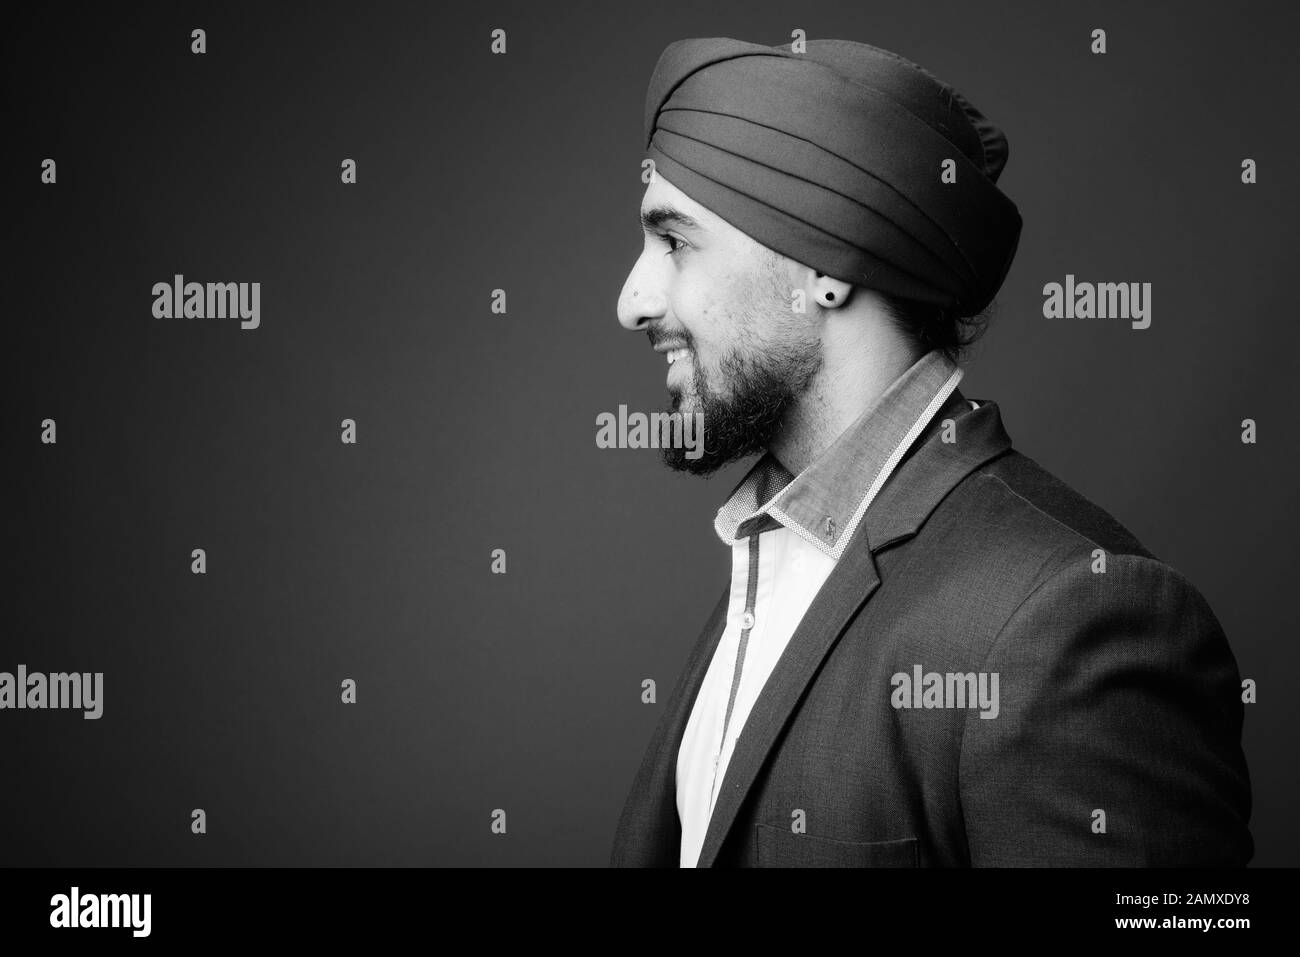 Young bearded Indian Sikh businessman wearing turban Stock Photo